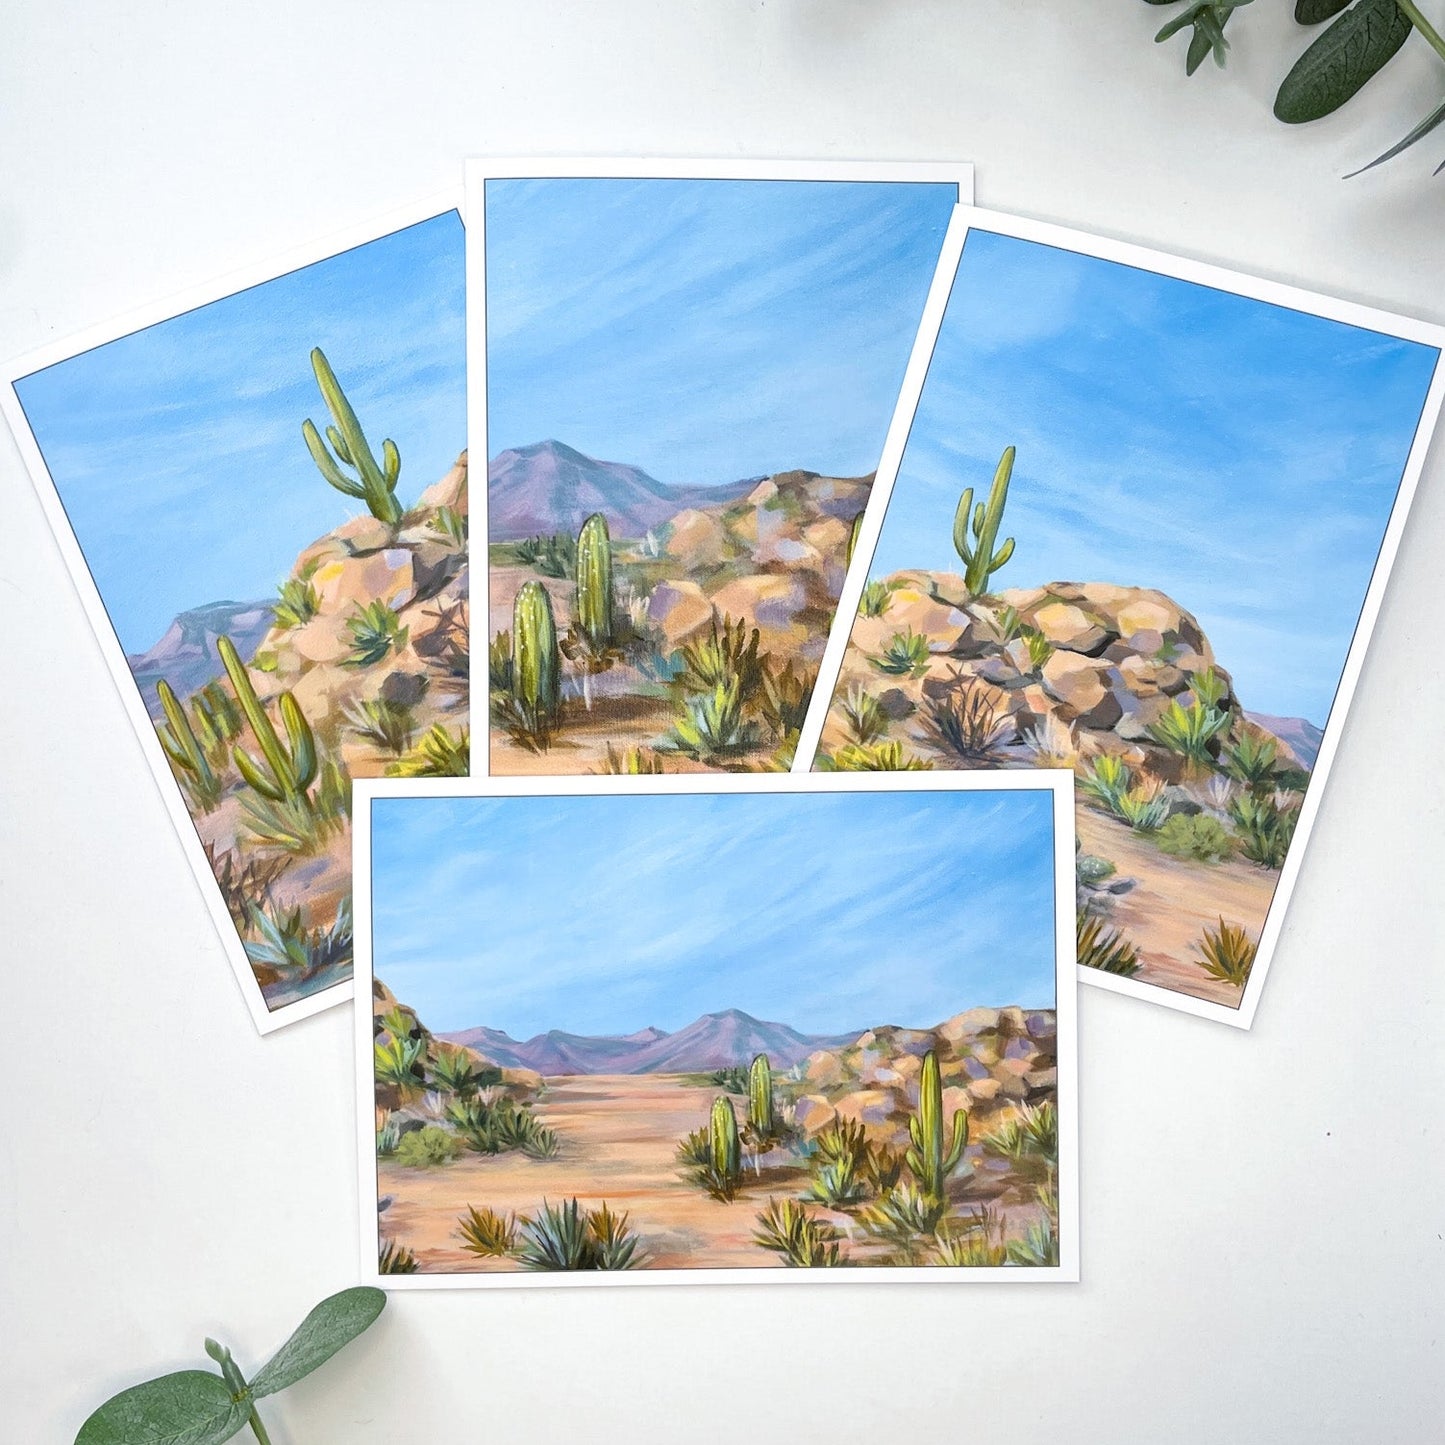 The Desert Collection 5x7" Greeting Cards